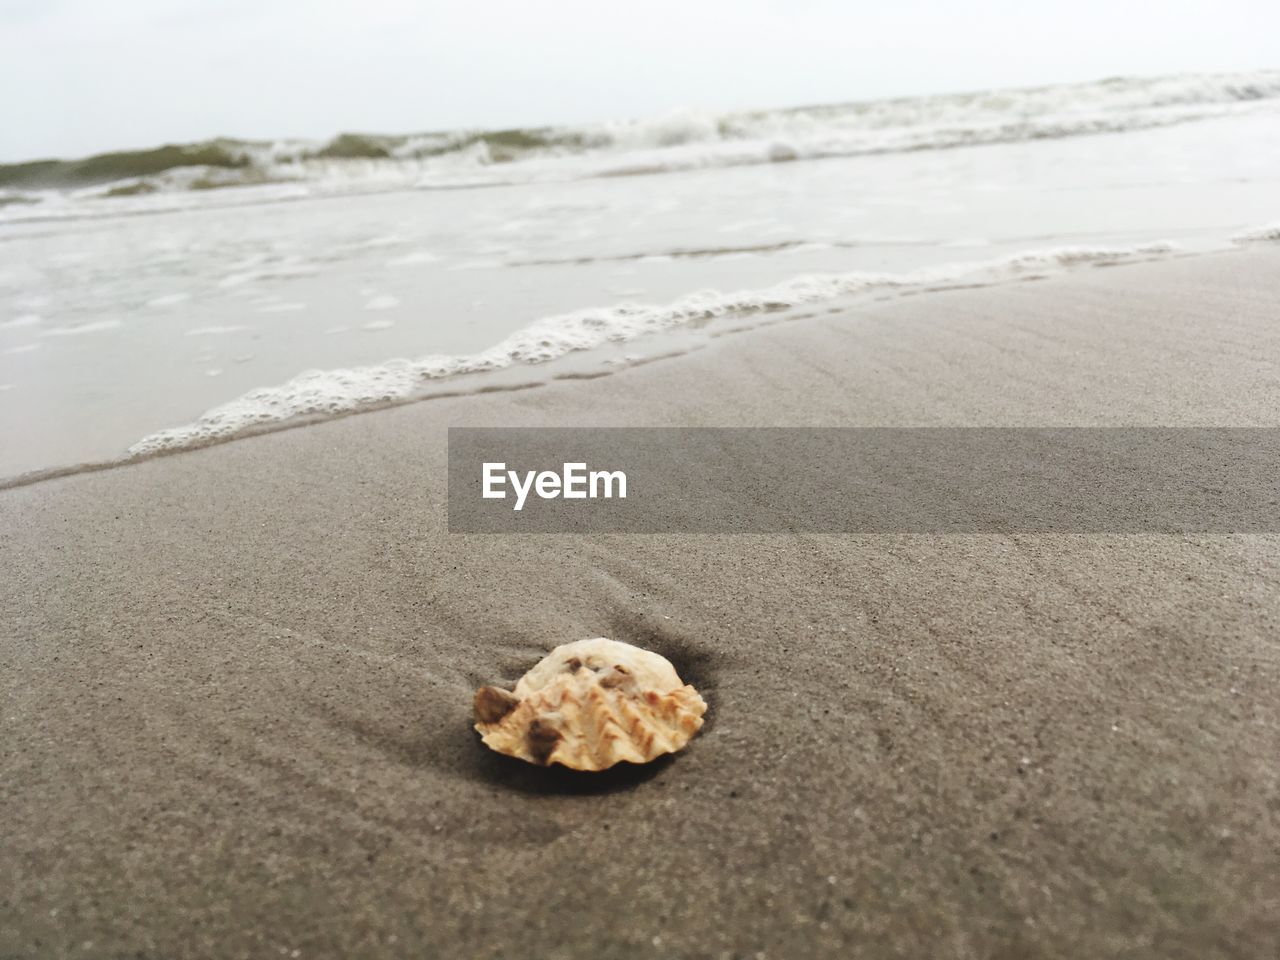 VIEW OF SEASHELL ON SAND